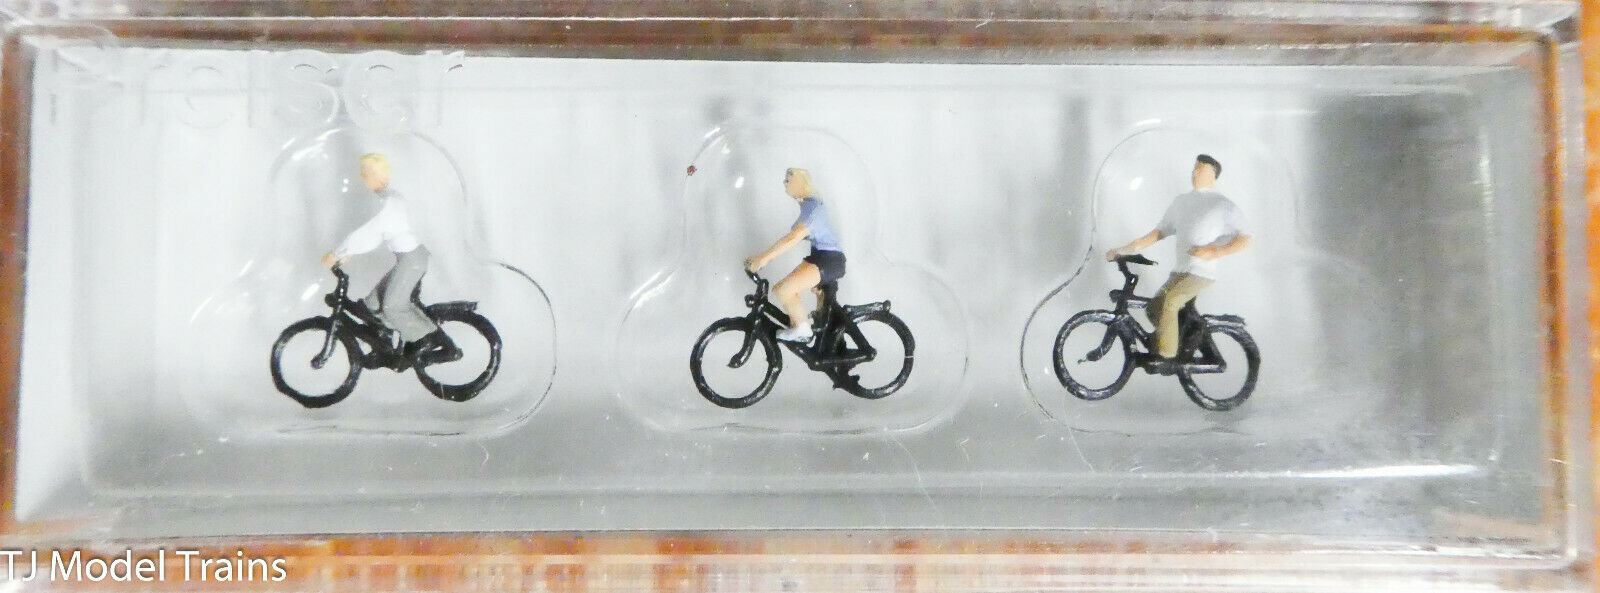 Preiser N #79089 Recreation & Sports -- Cyclists (1:160th Scale) Hand Painted